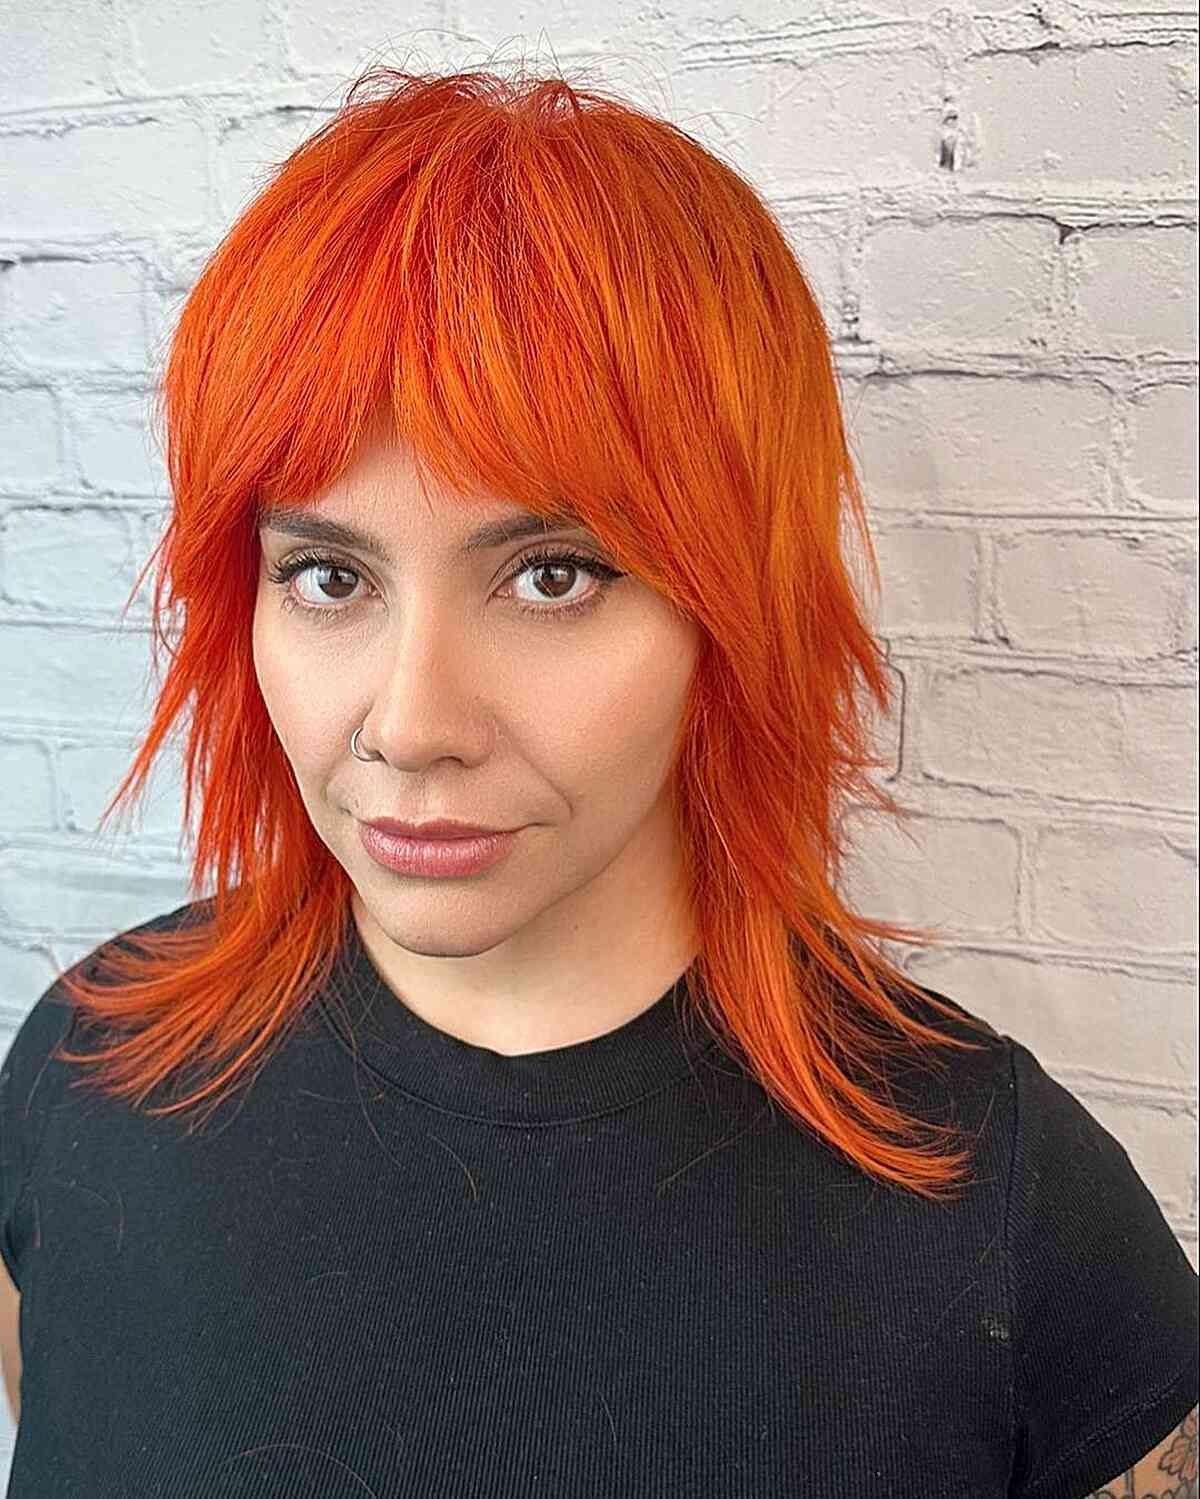 Medium-Length Tangerine Shag with Bangs for girls with an edgy style